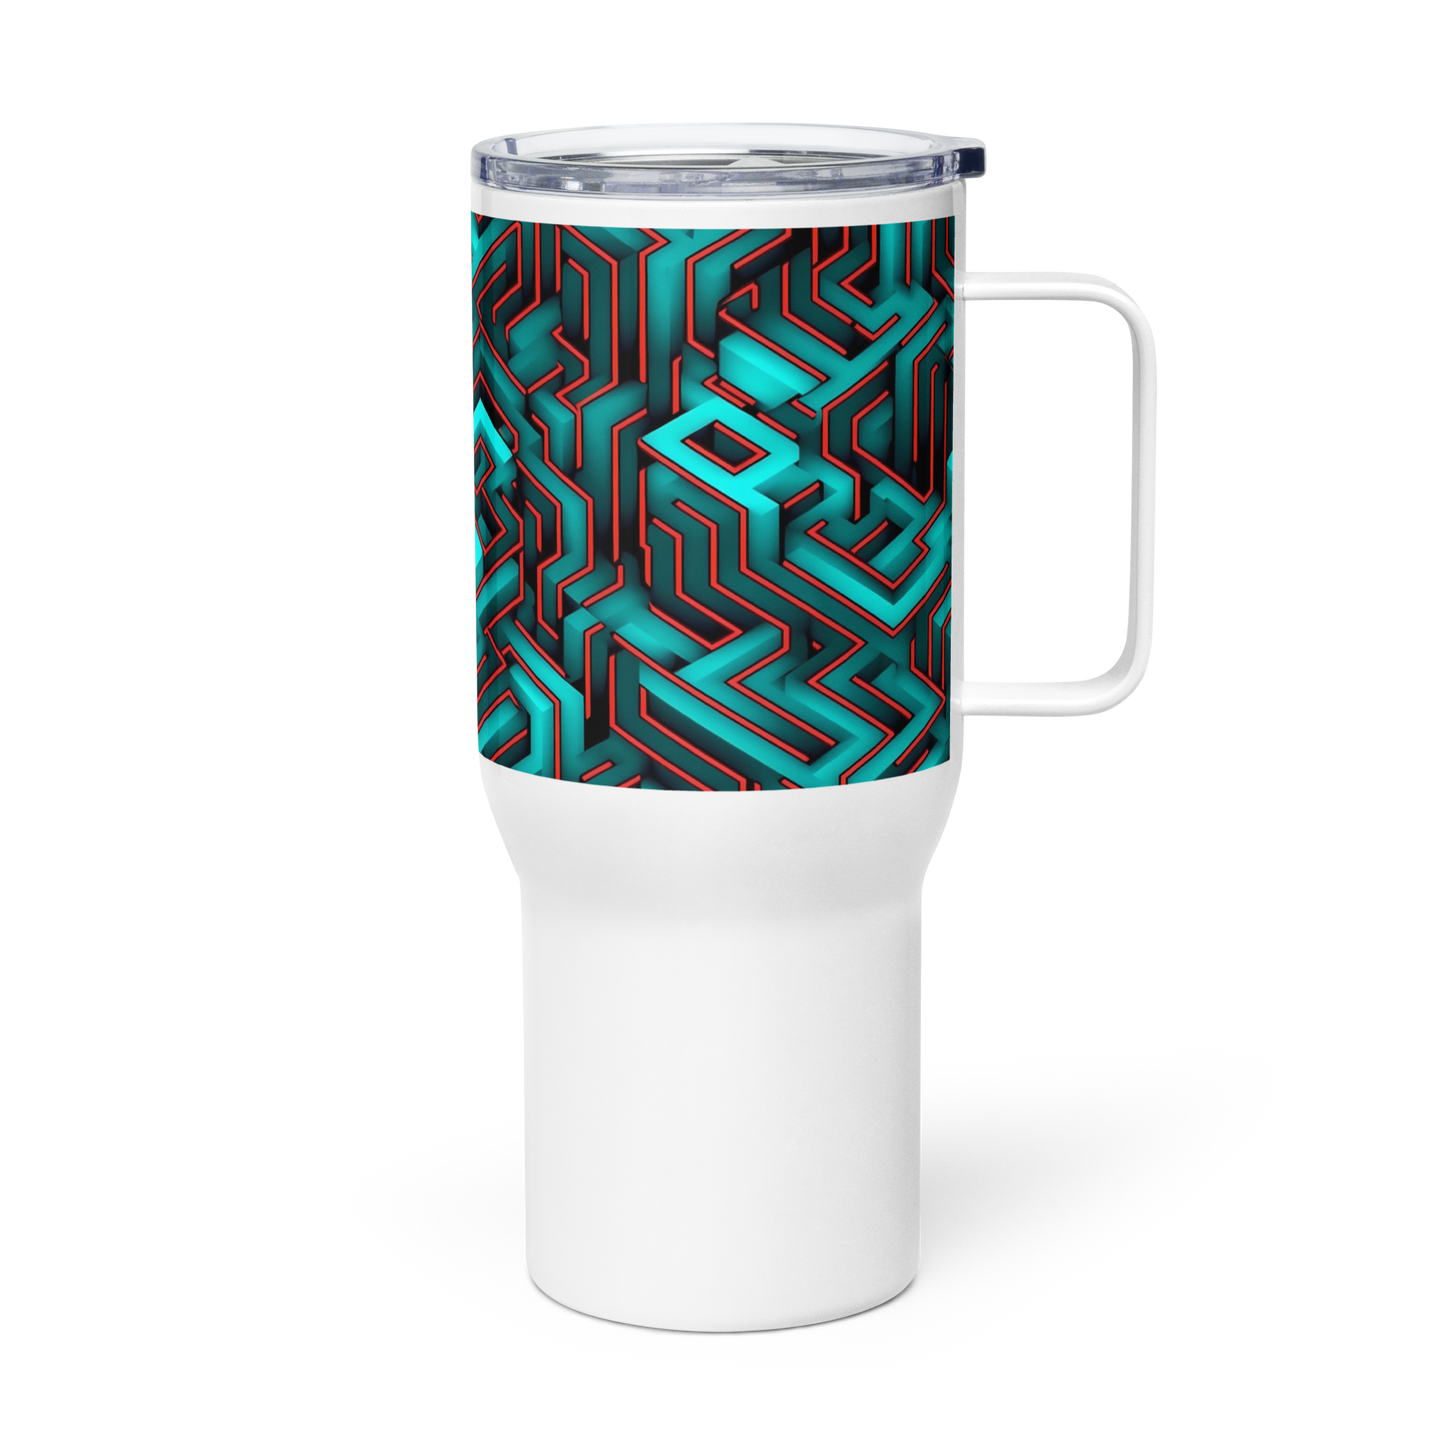 3D Maze Illusion | 3D Patterns | Travel Mug with a Handle - #2